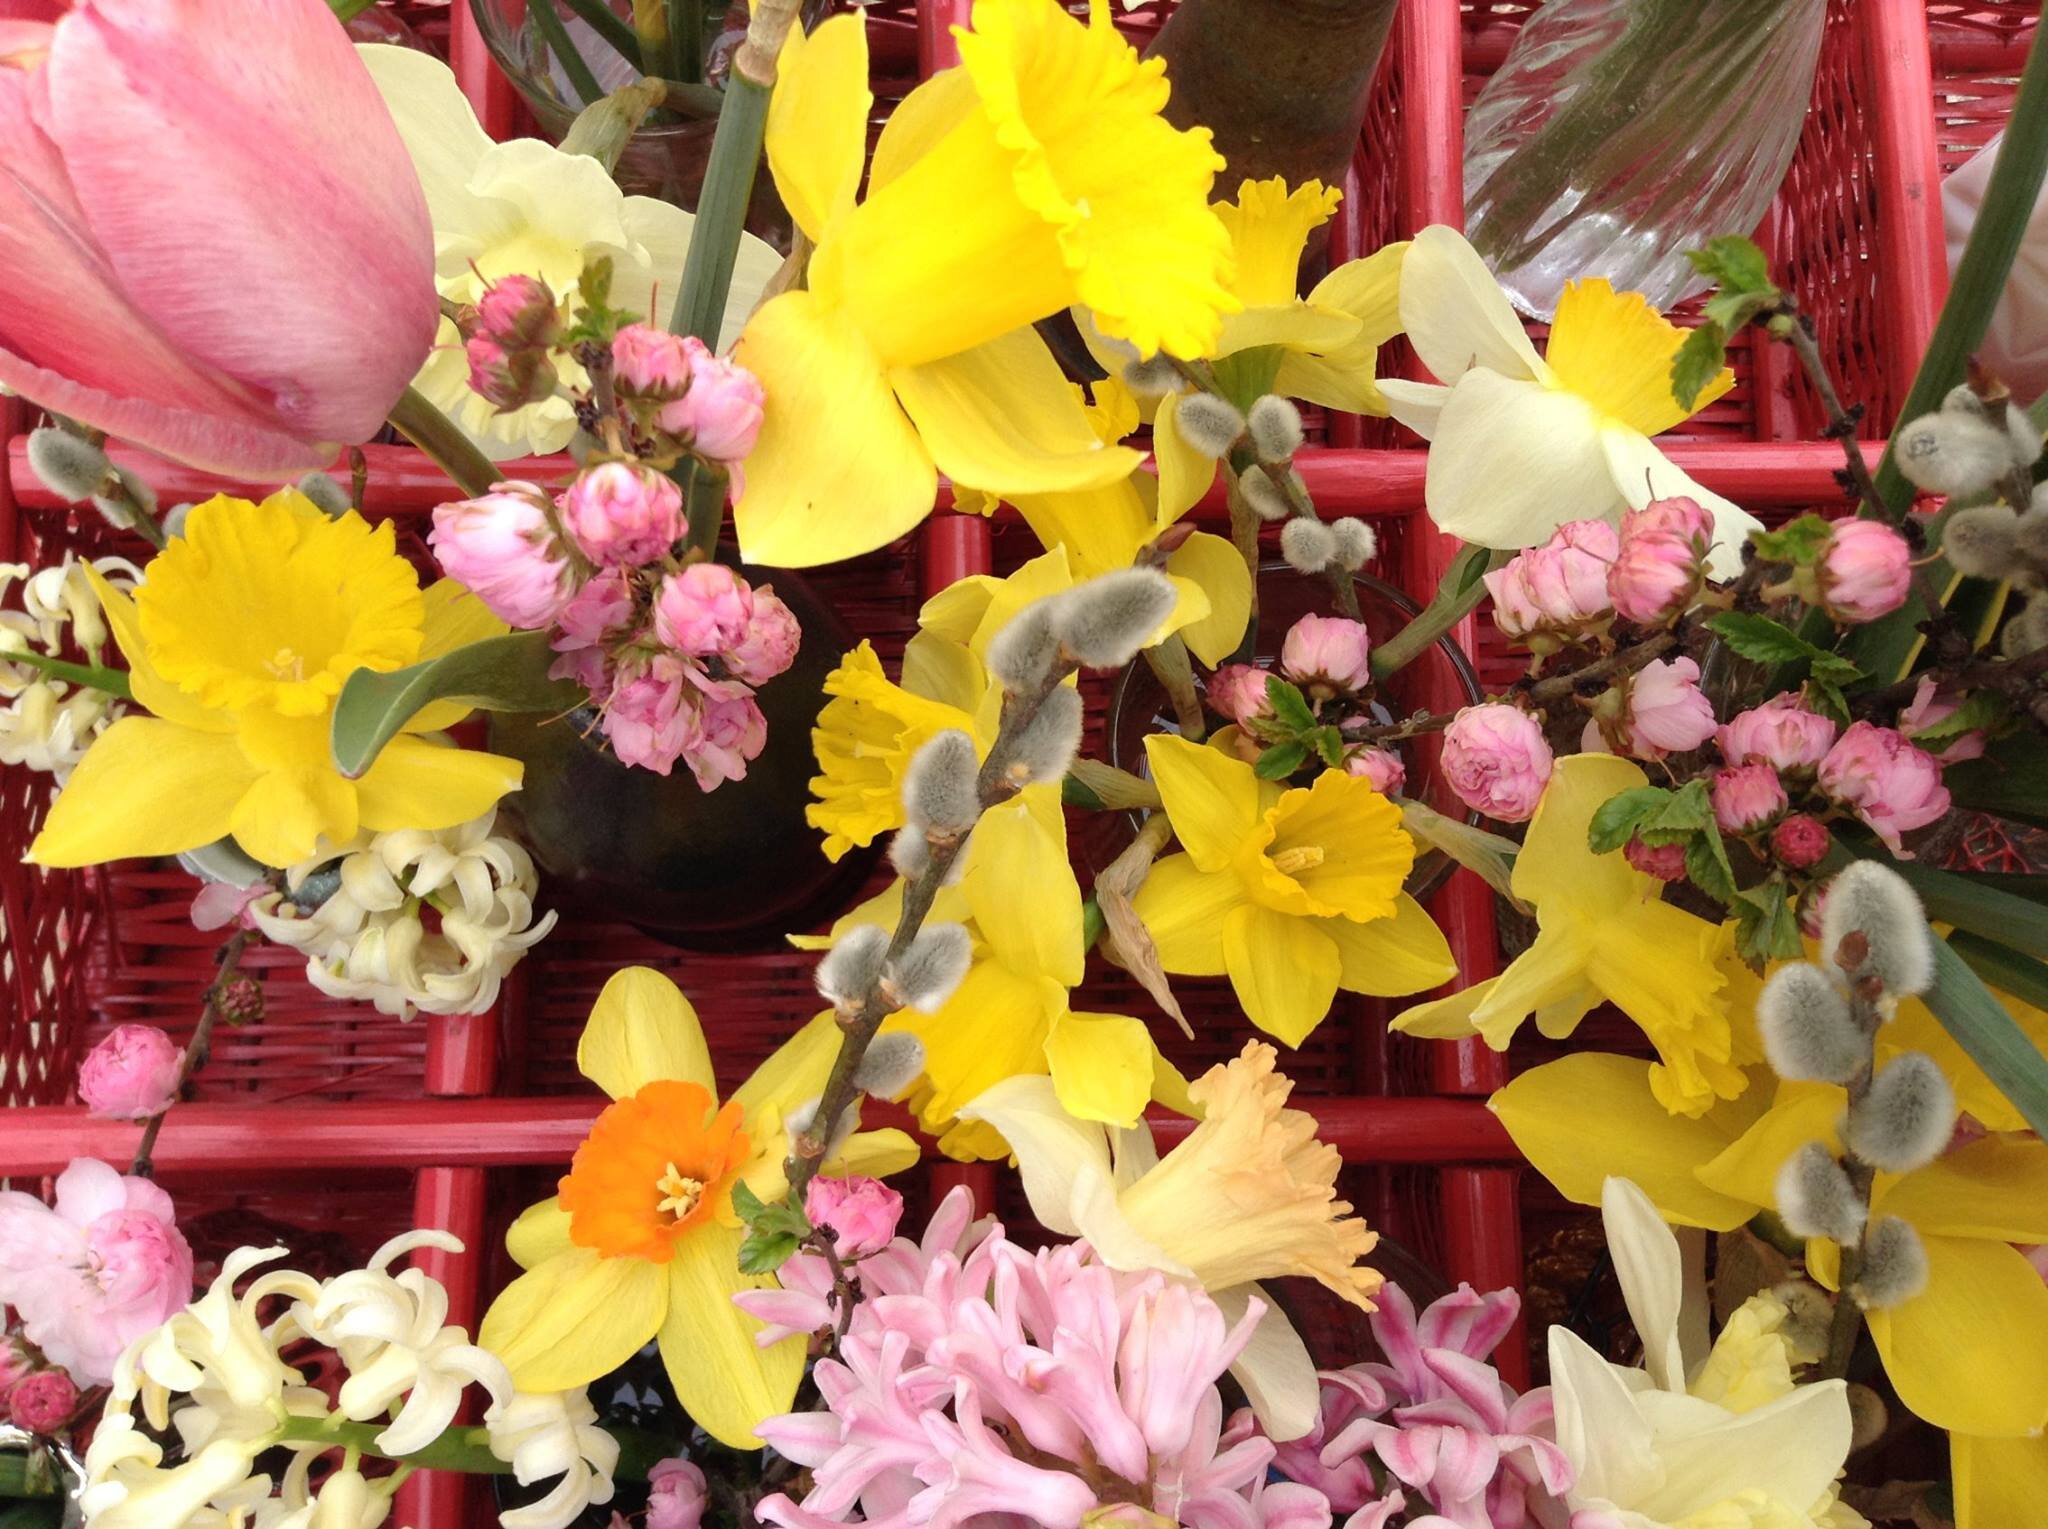 container of daffodils and tulips